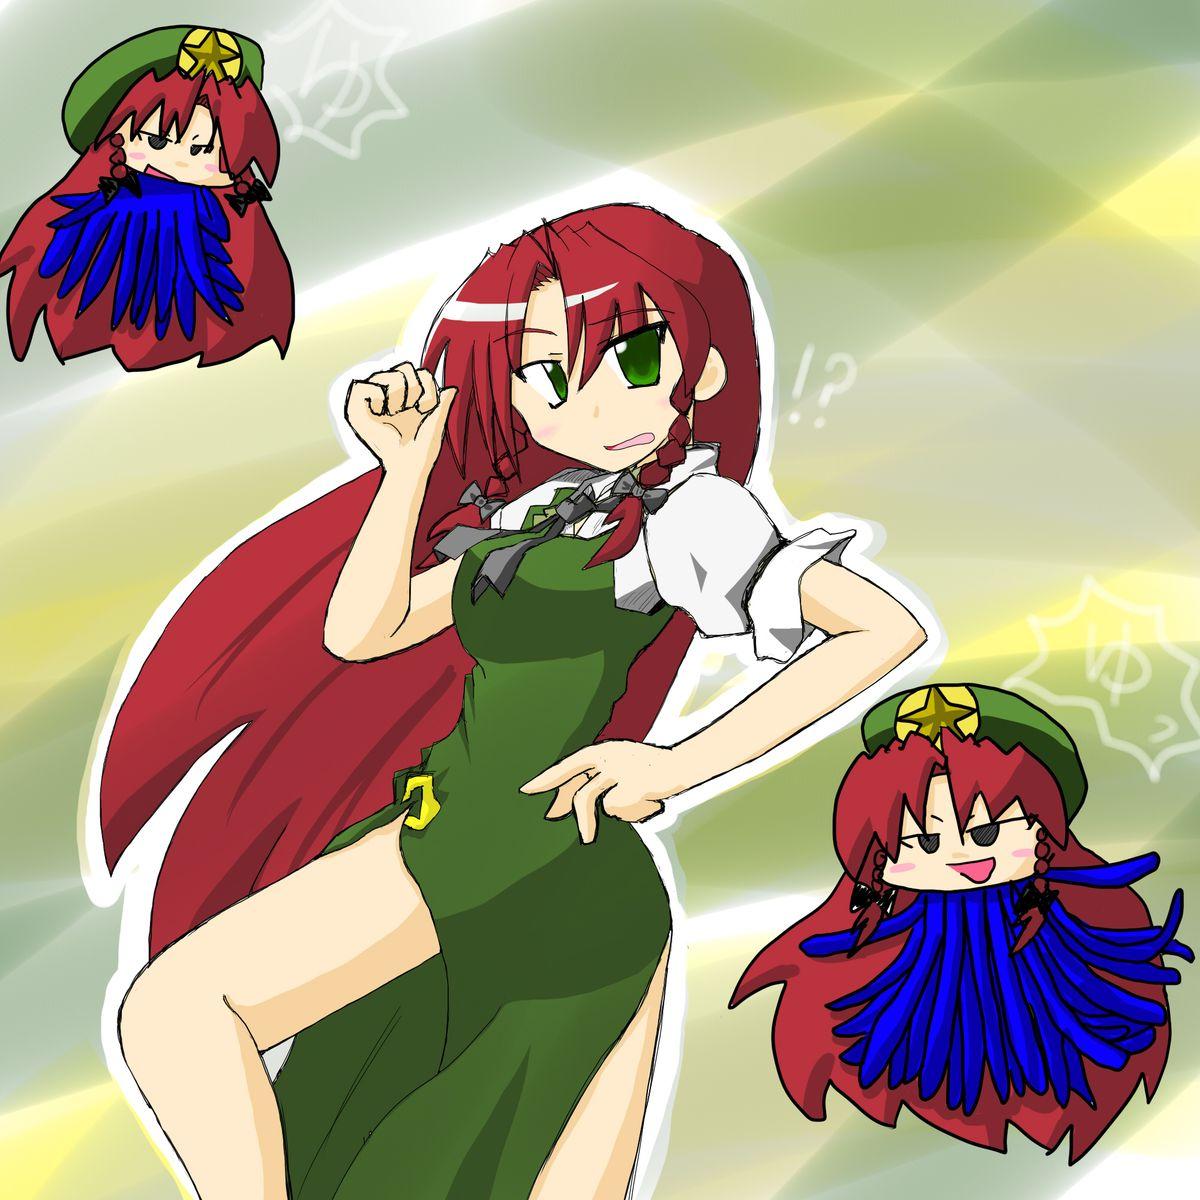 Meiling's go 61